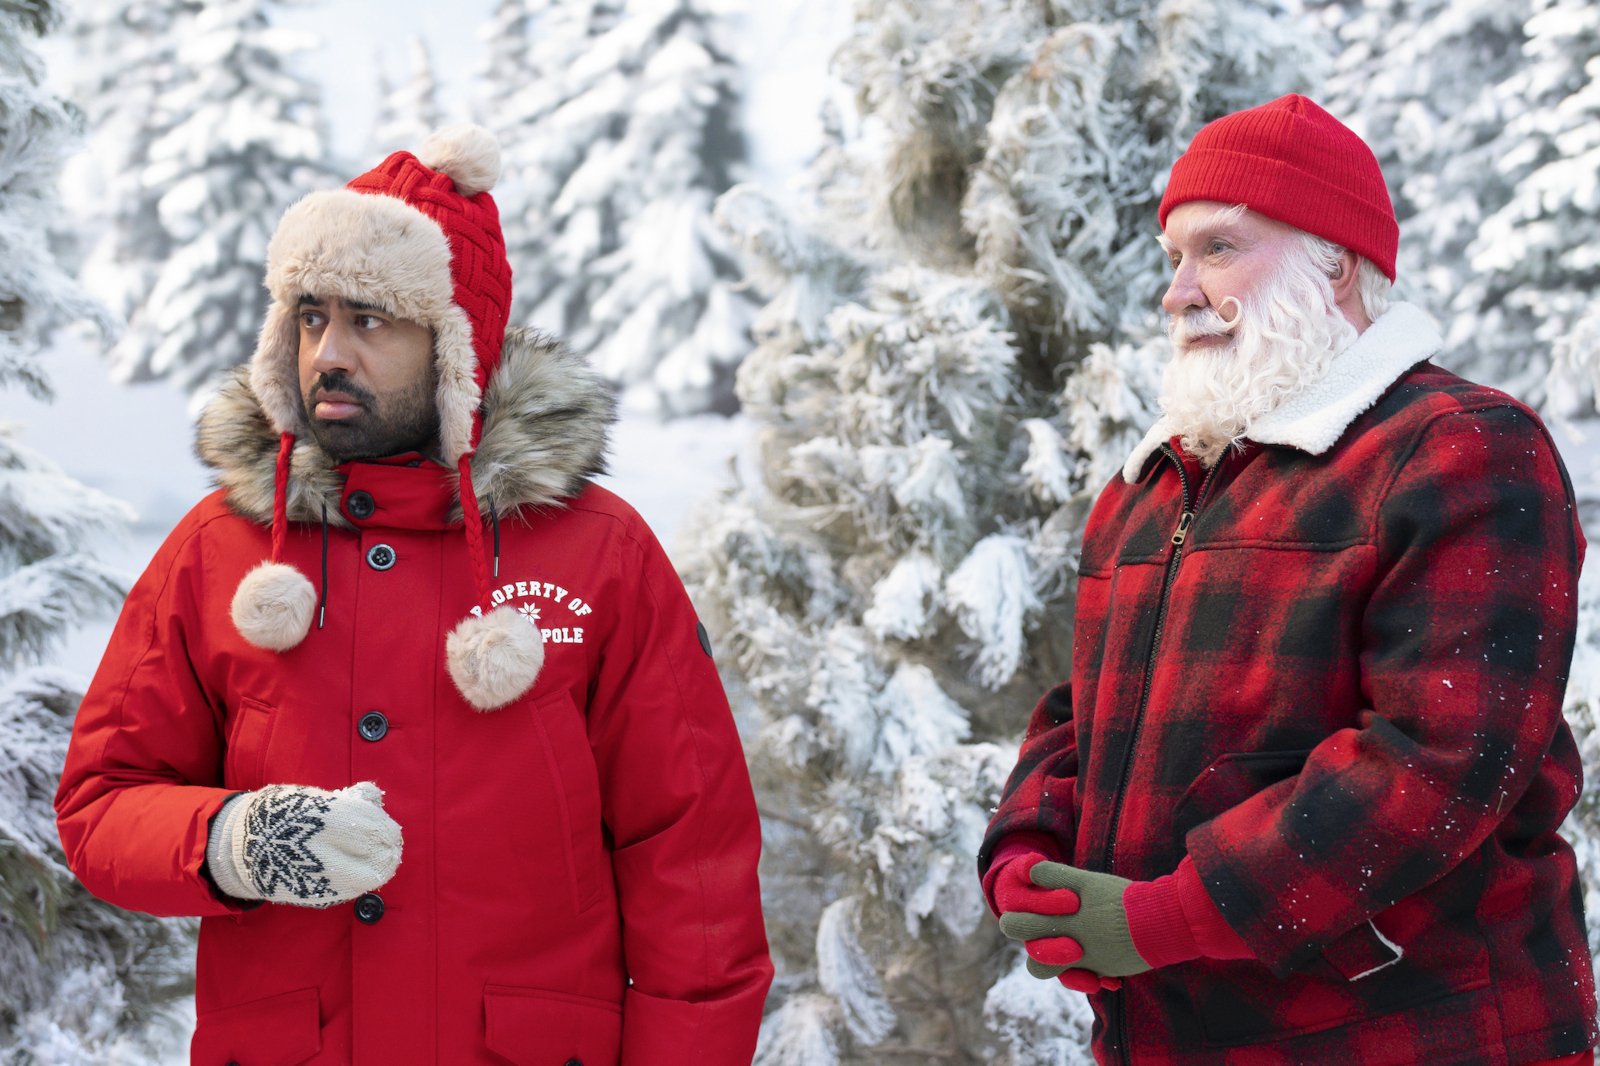 The Santa Clauses' Episode 4 Preview: Big Changes at the North Pole